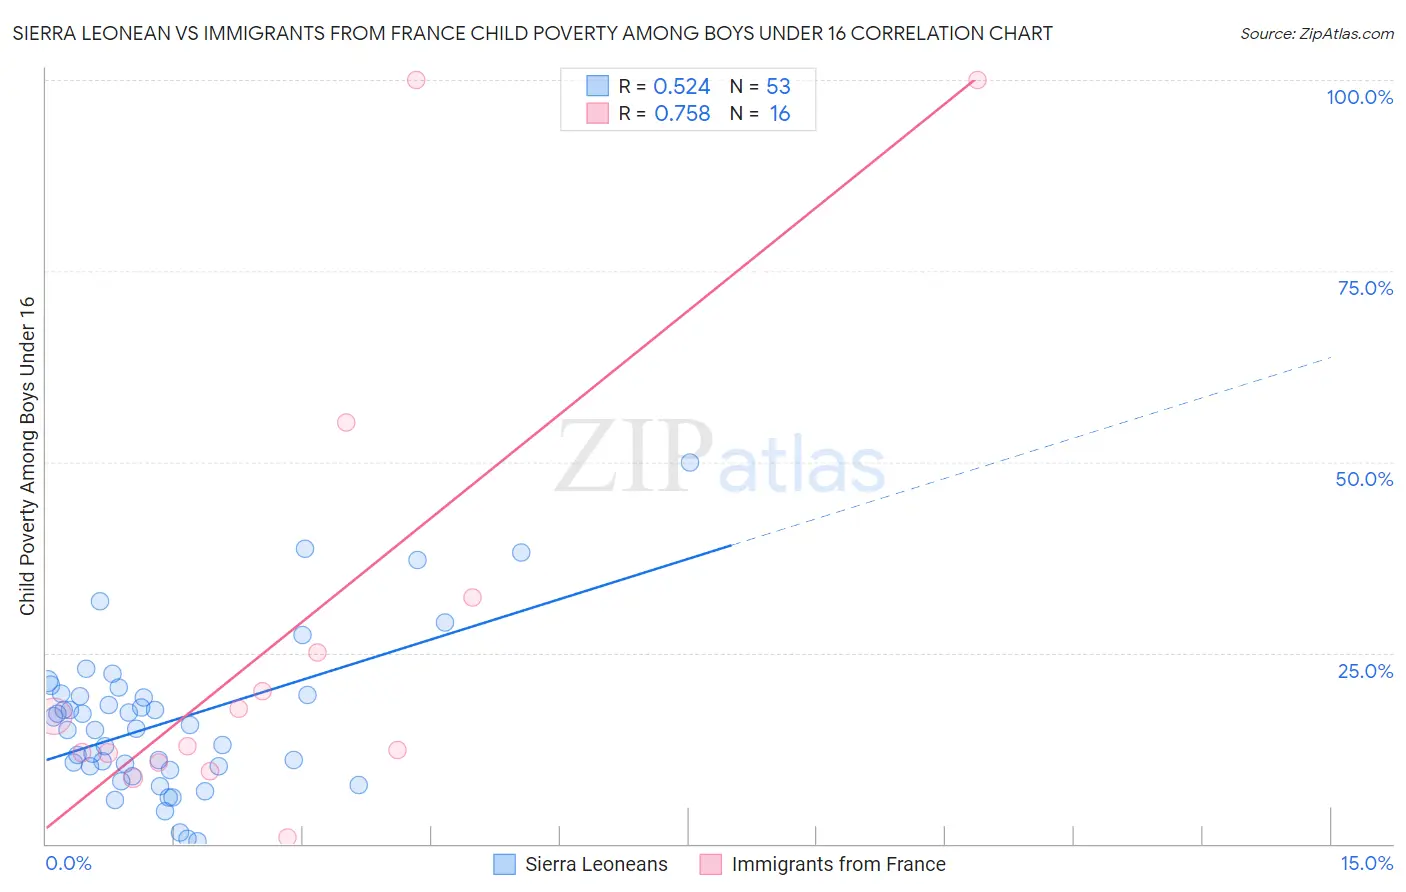 Sierra Leonean vs Immigrants from France Child Poverty Among Boys Under 16